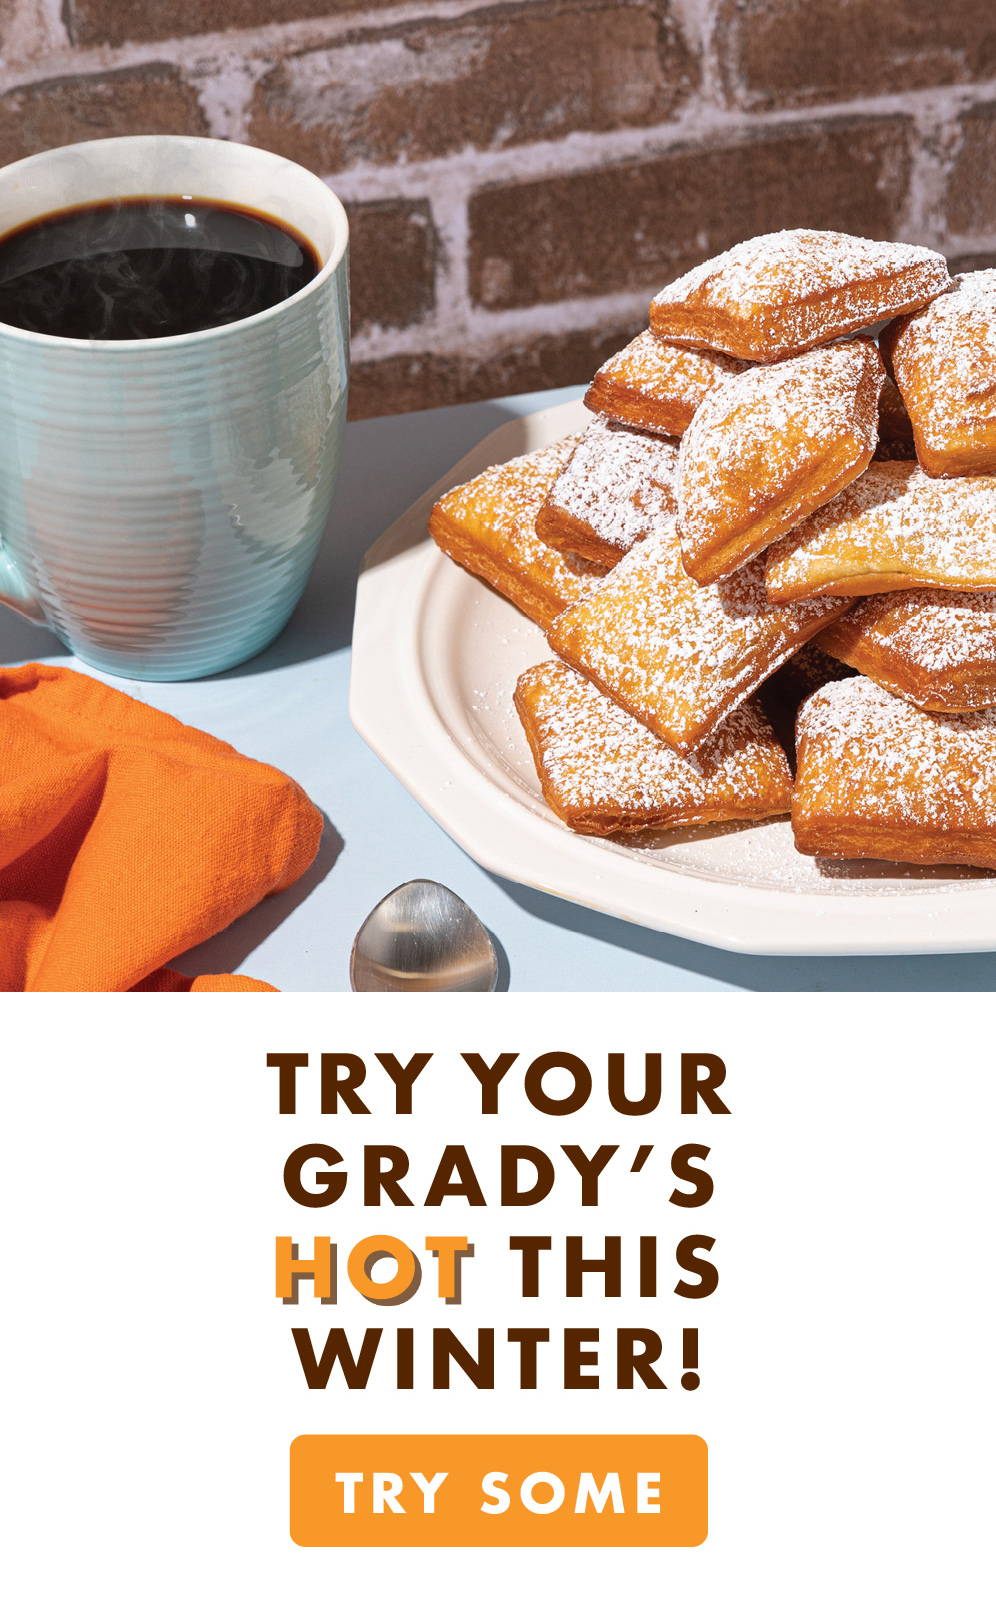 Try Grady's Hot this Winter!